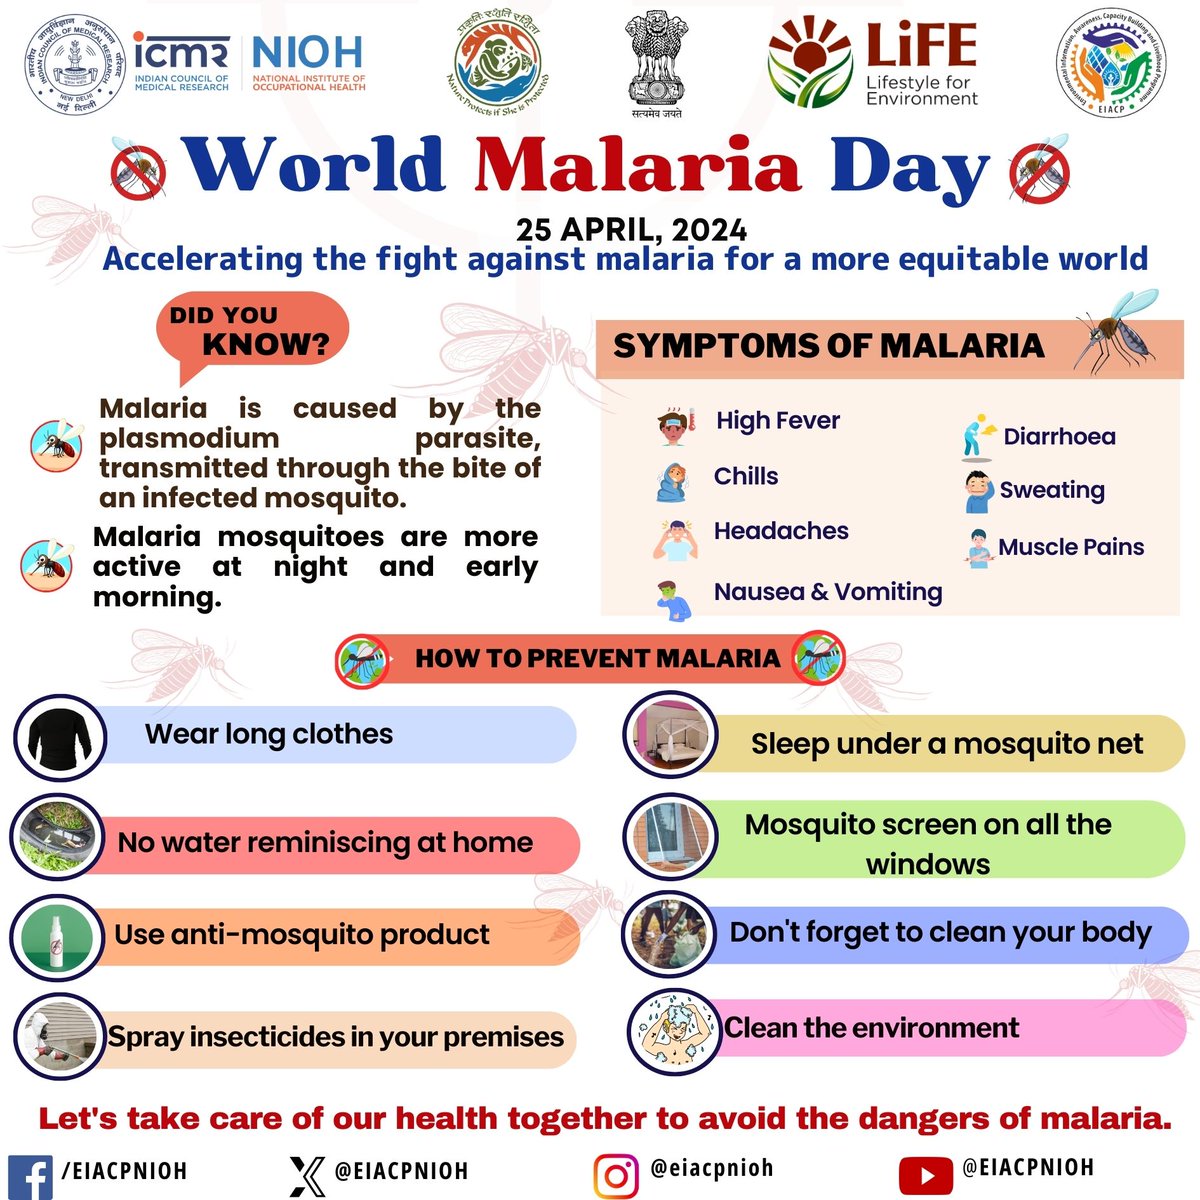 Let's take care of our health together to avoid the dangers of malaria. @eiacpindia @icmrnioh @icmrdelhi @moefcc @WHO @GujHFWDept #WorldMalariaDay2024